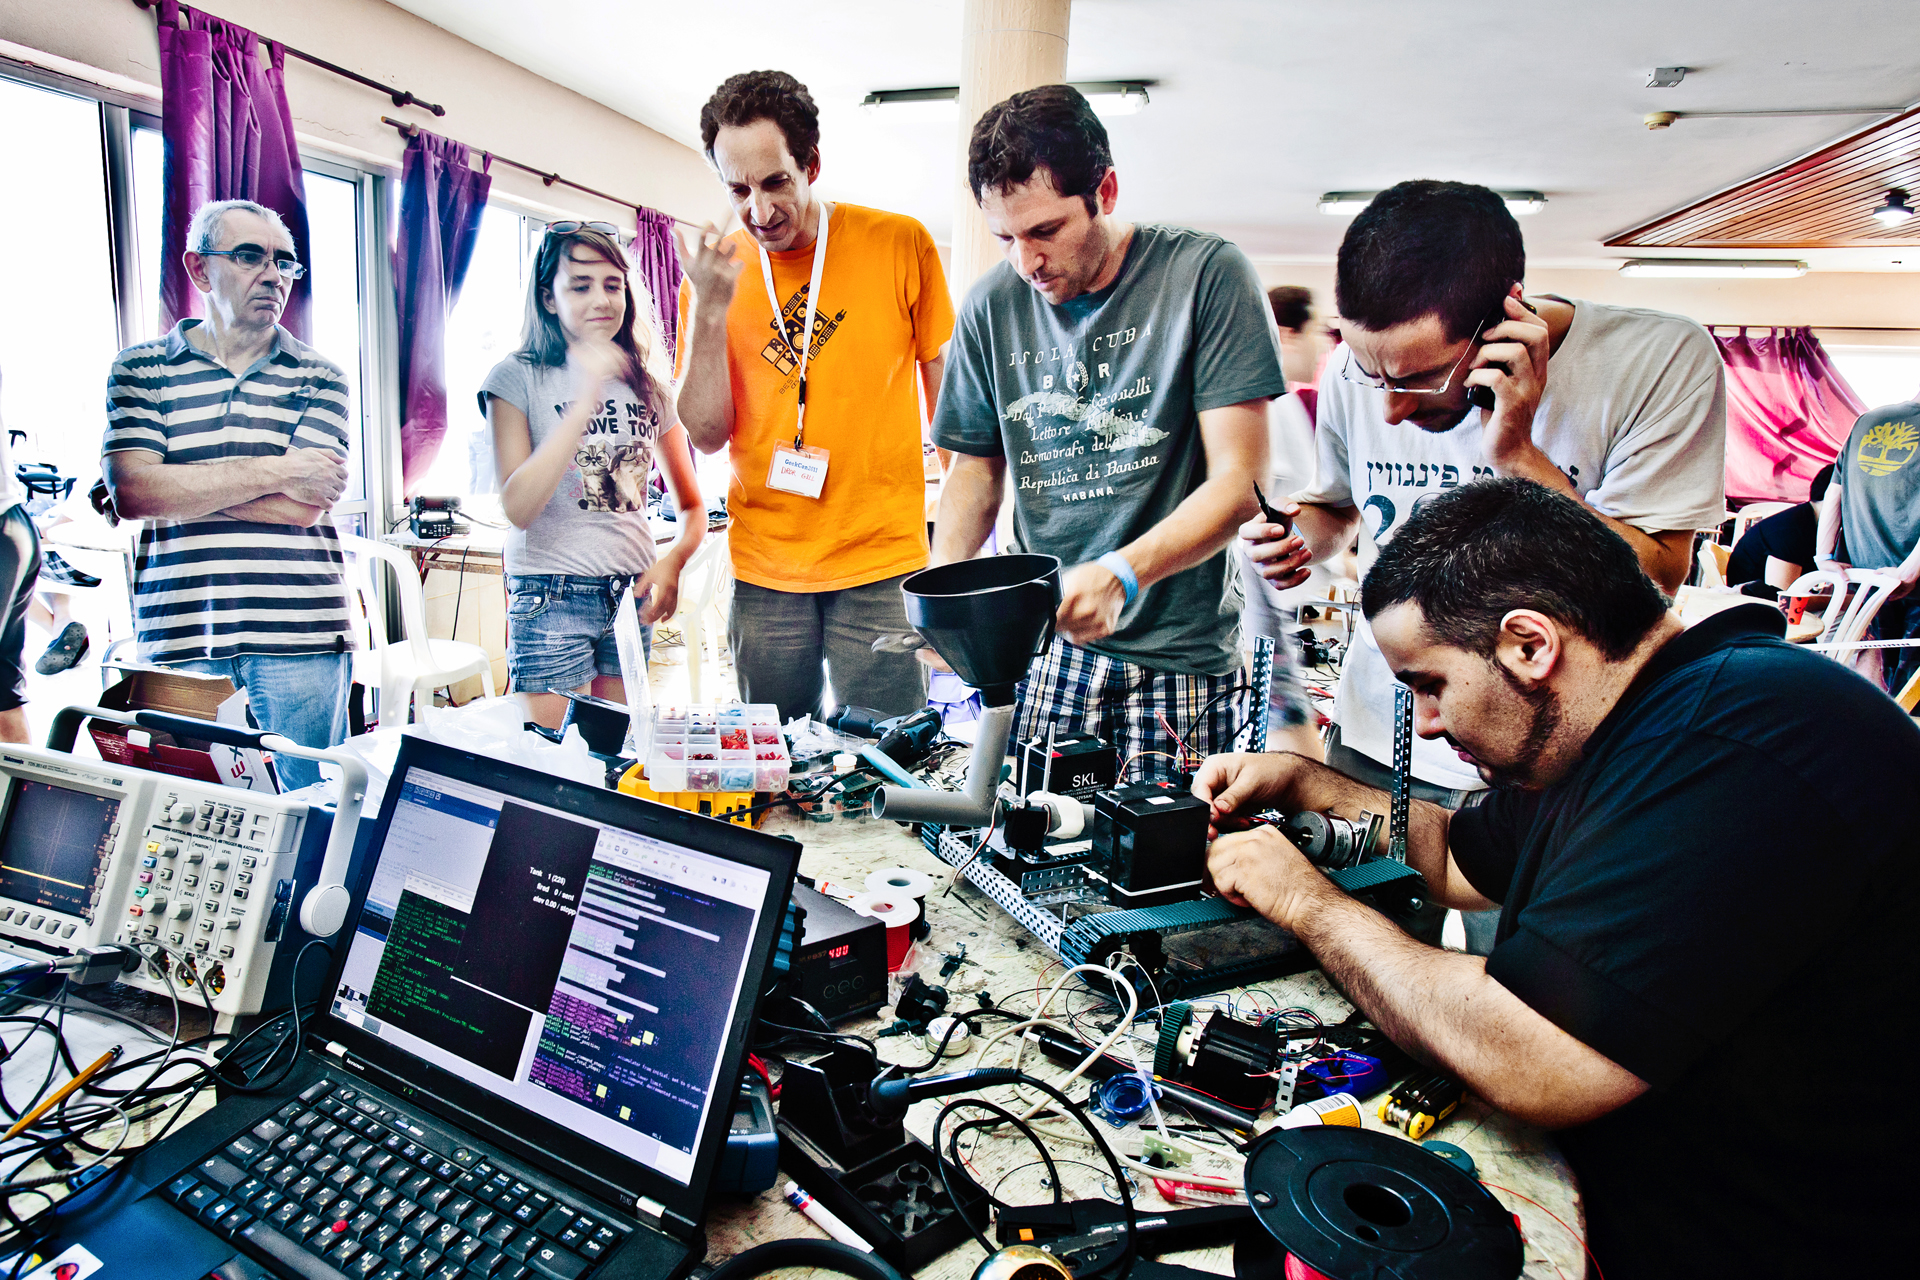 Hackers stand around their project at Geekcon 2011, Israel